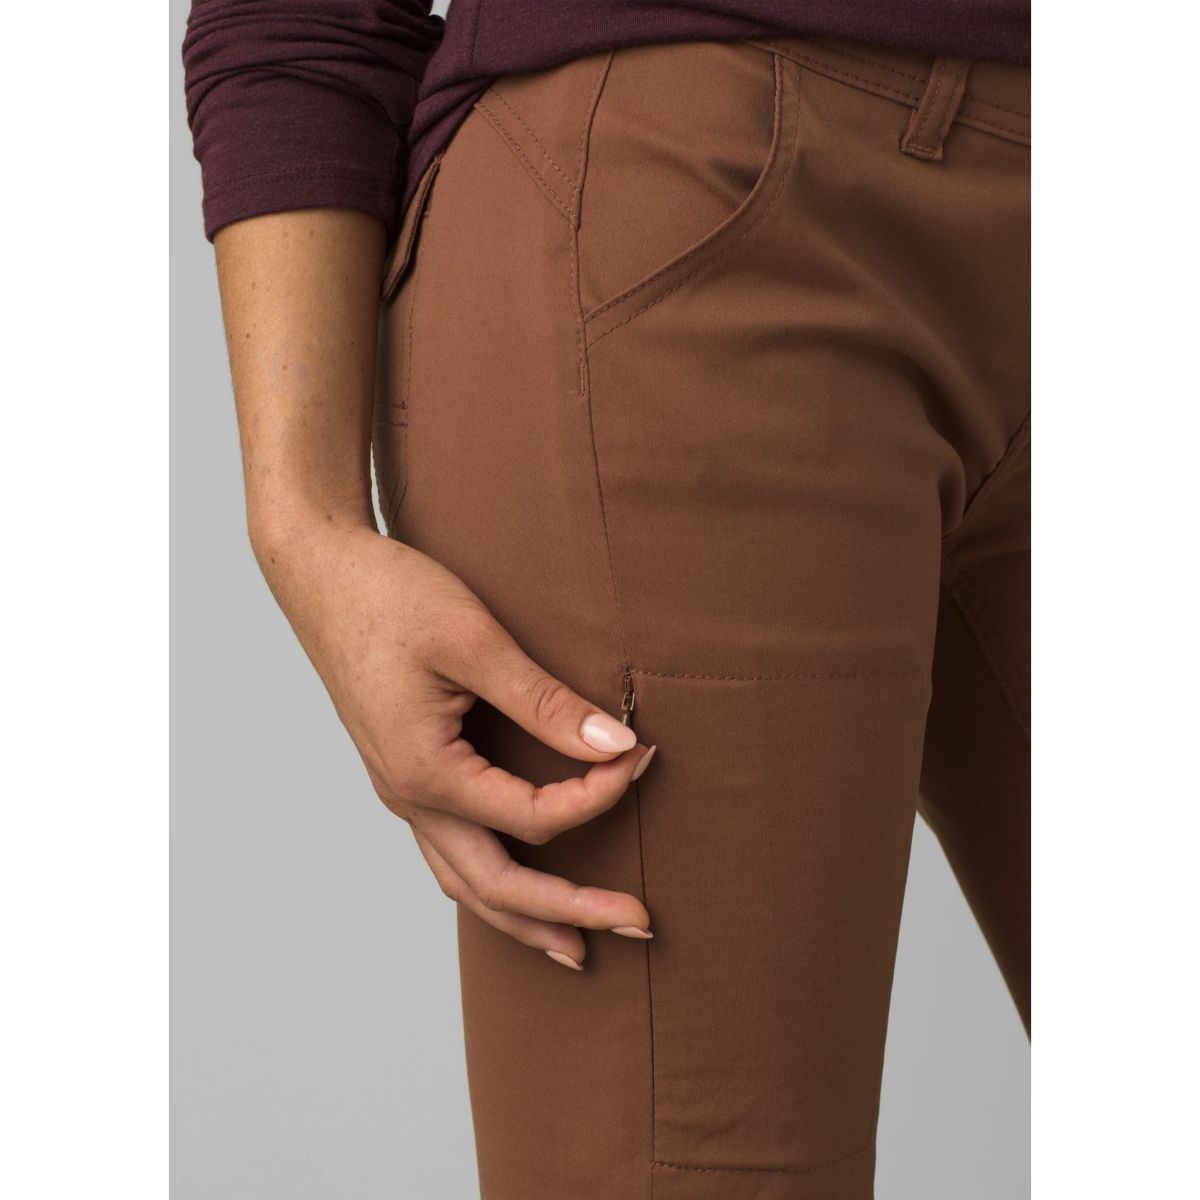 Halle AT Straight Pant, Pants